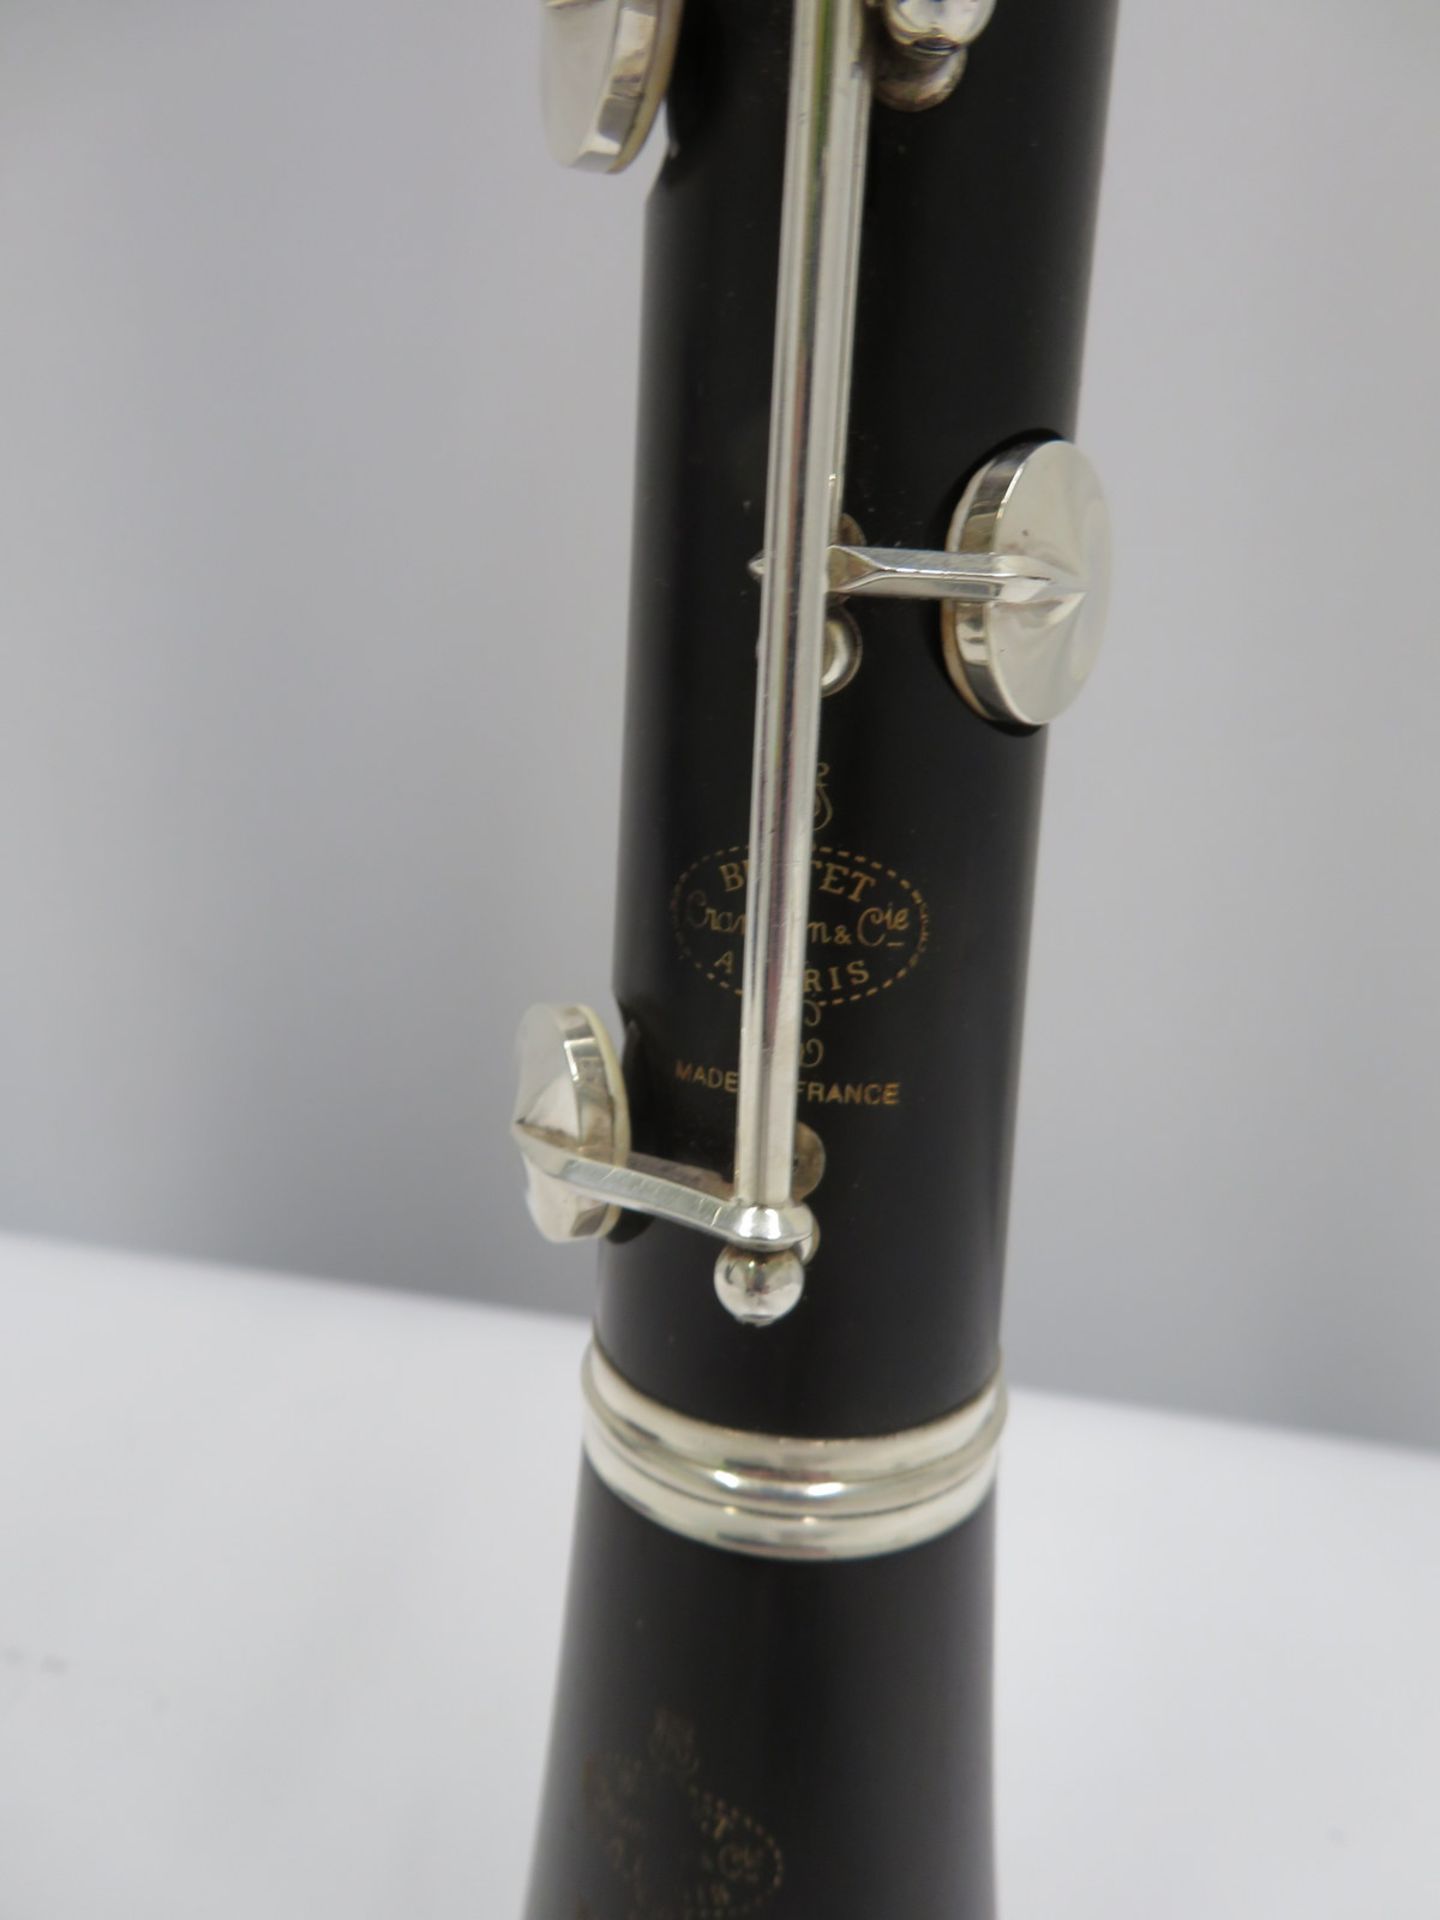 Buffet Crampon R13 Prestige clarinet with case. Serial number: 584774. - Image 10 of 19